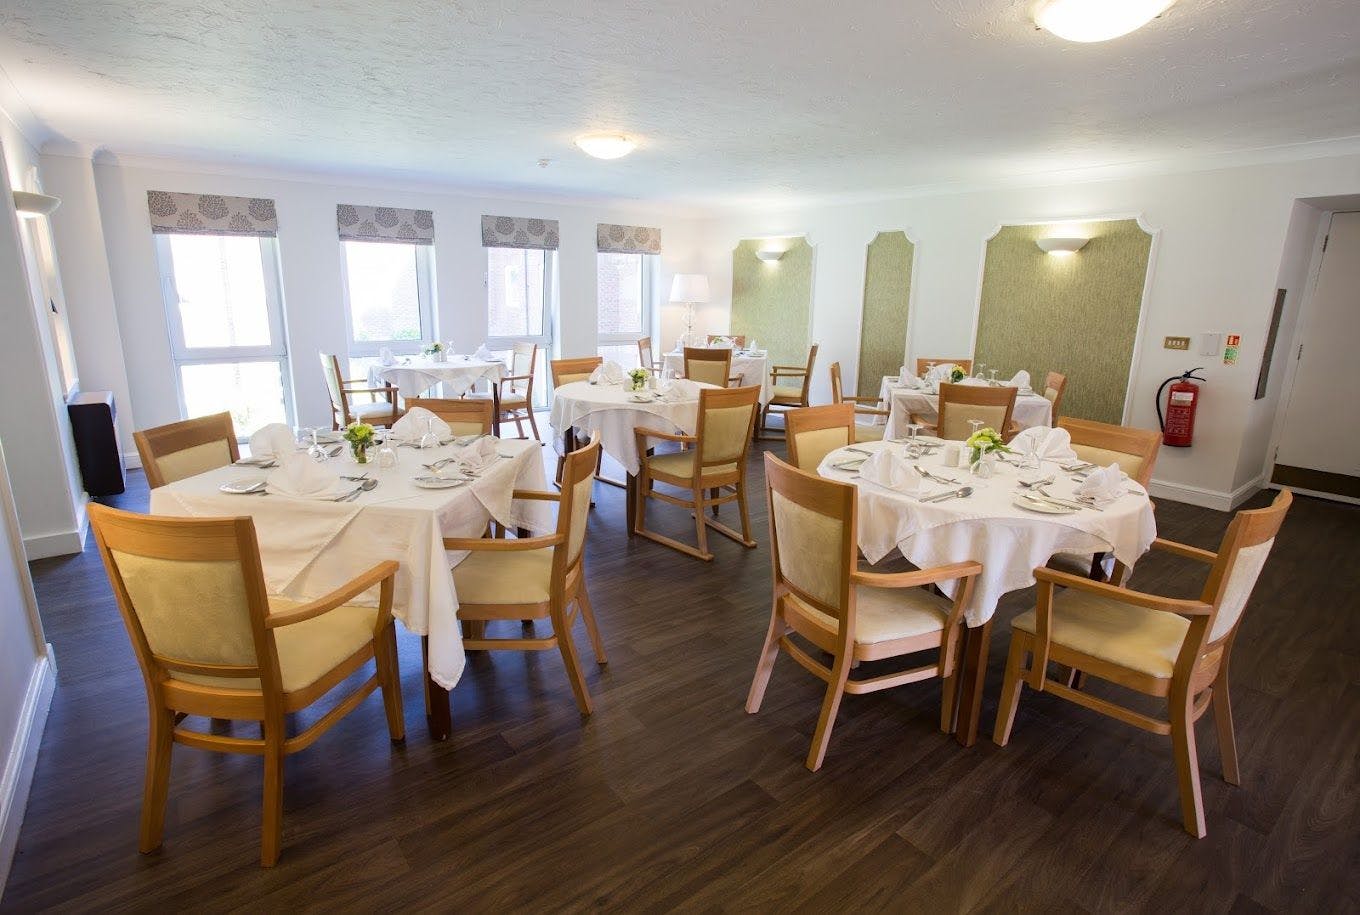 Dining Room at Queensmount Care Home in Bournemouth, Dorset